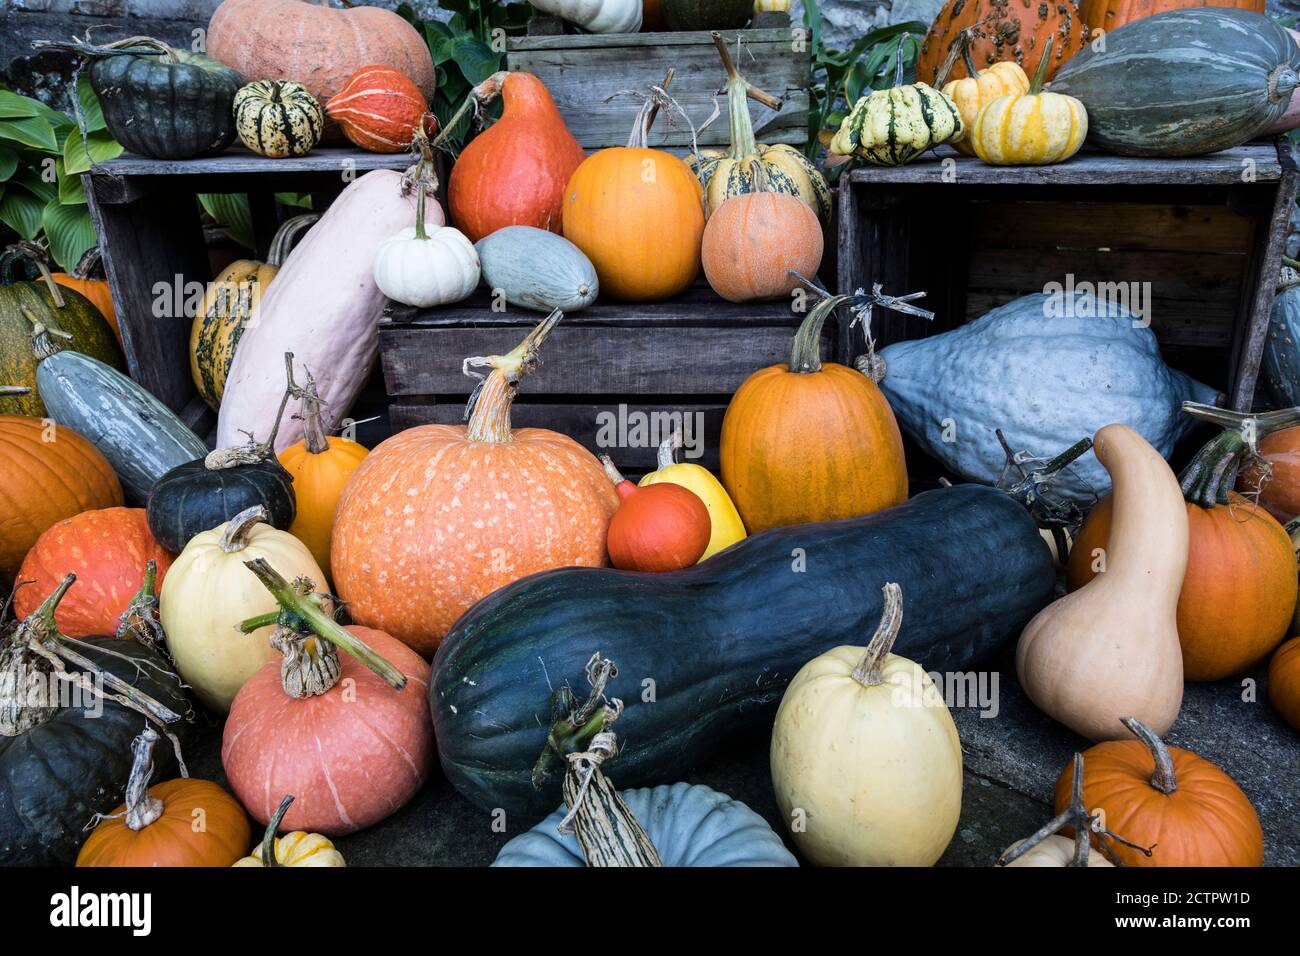 Colourful display of gourds and squashes, England. Stock Photo